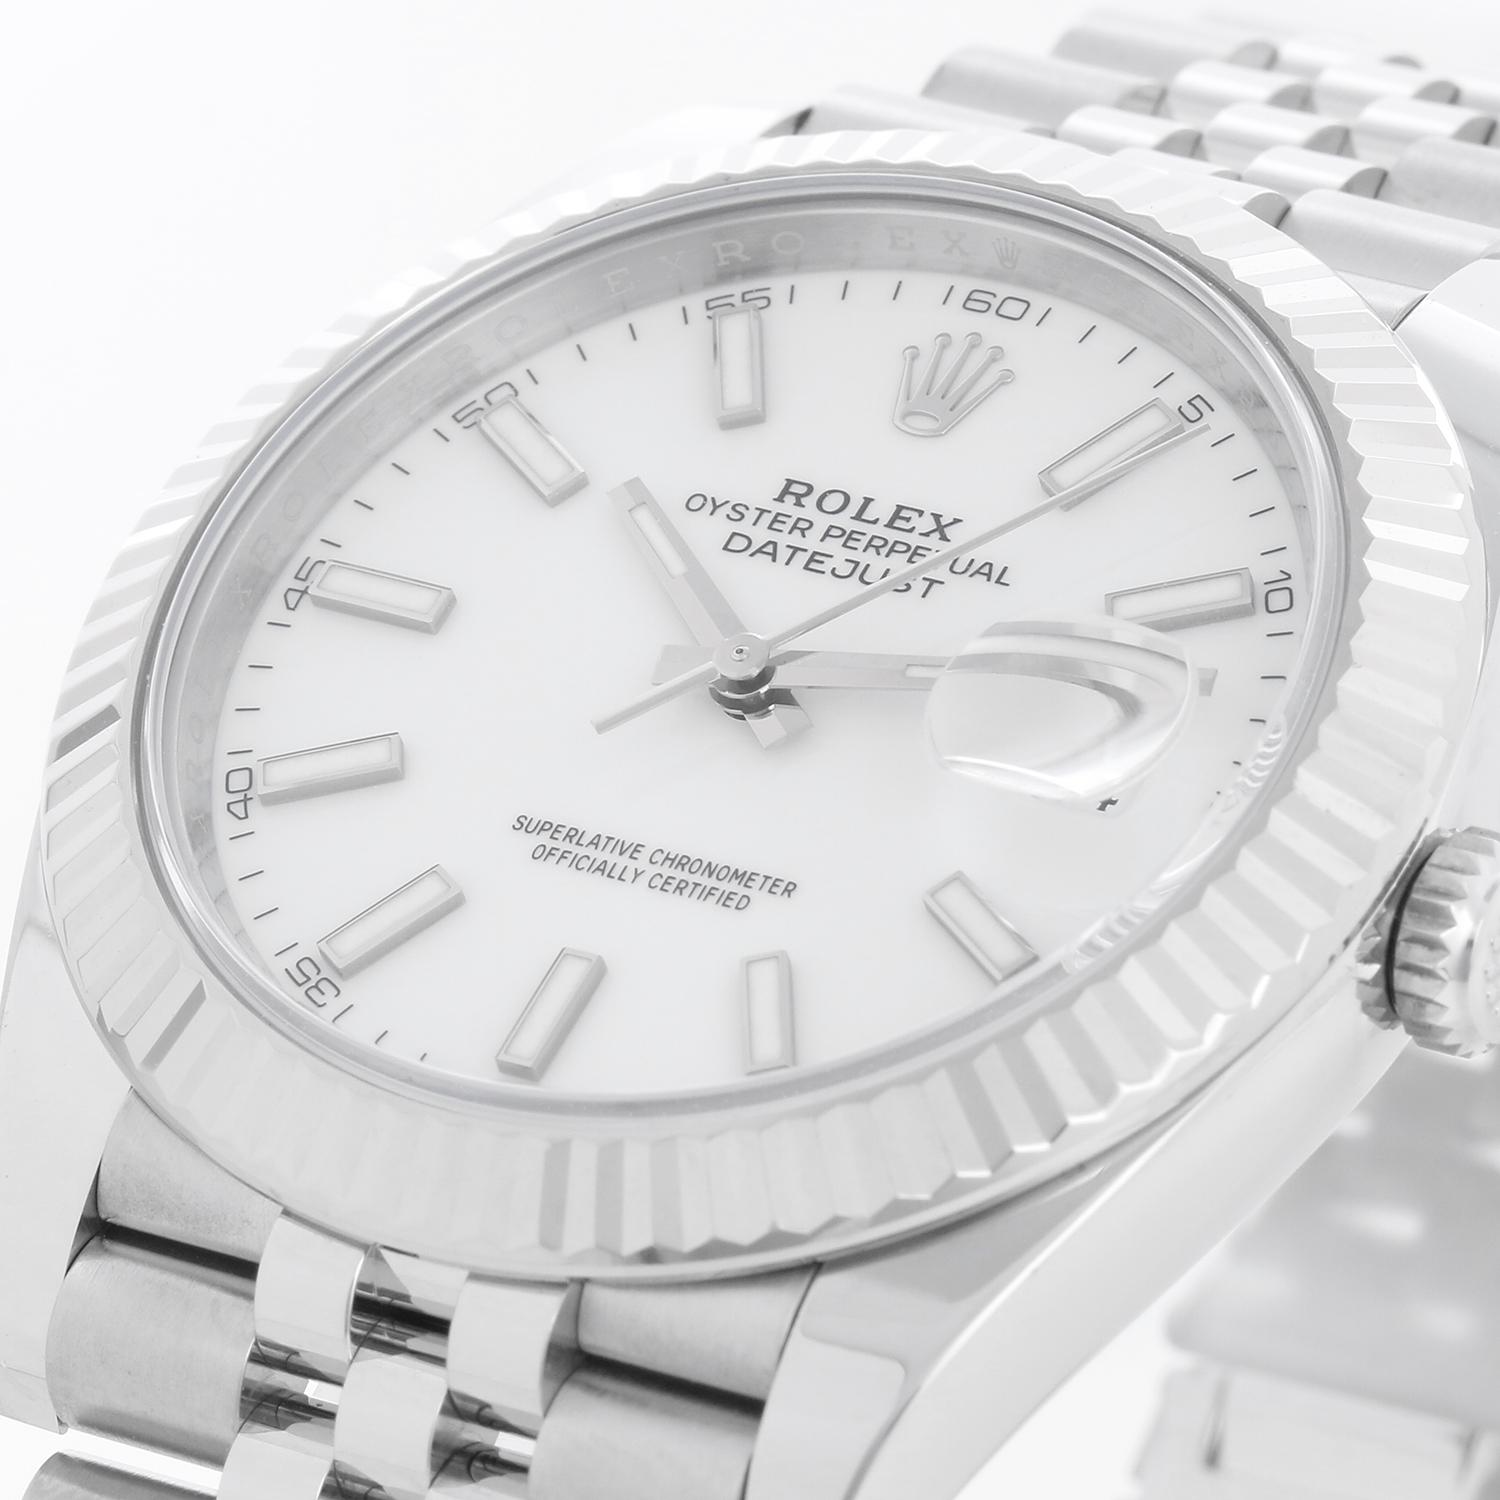 Rolex Datejust 41 Stainless Steel Men's White Dial Watch 126334 2